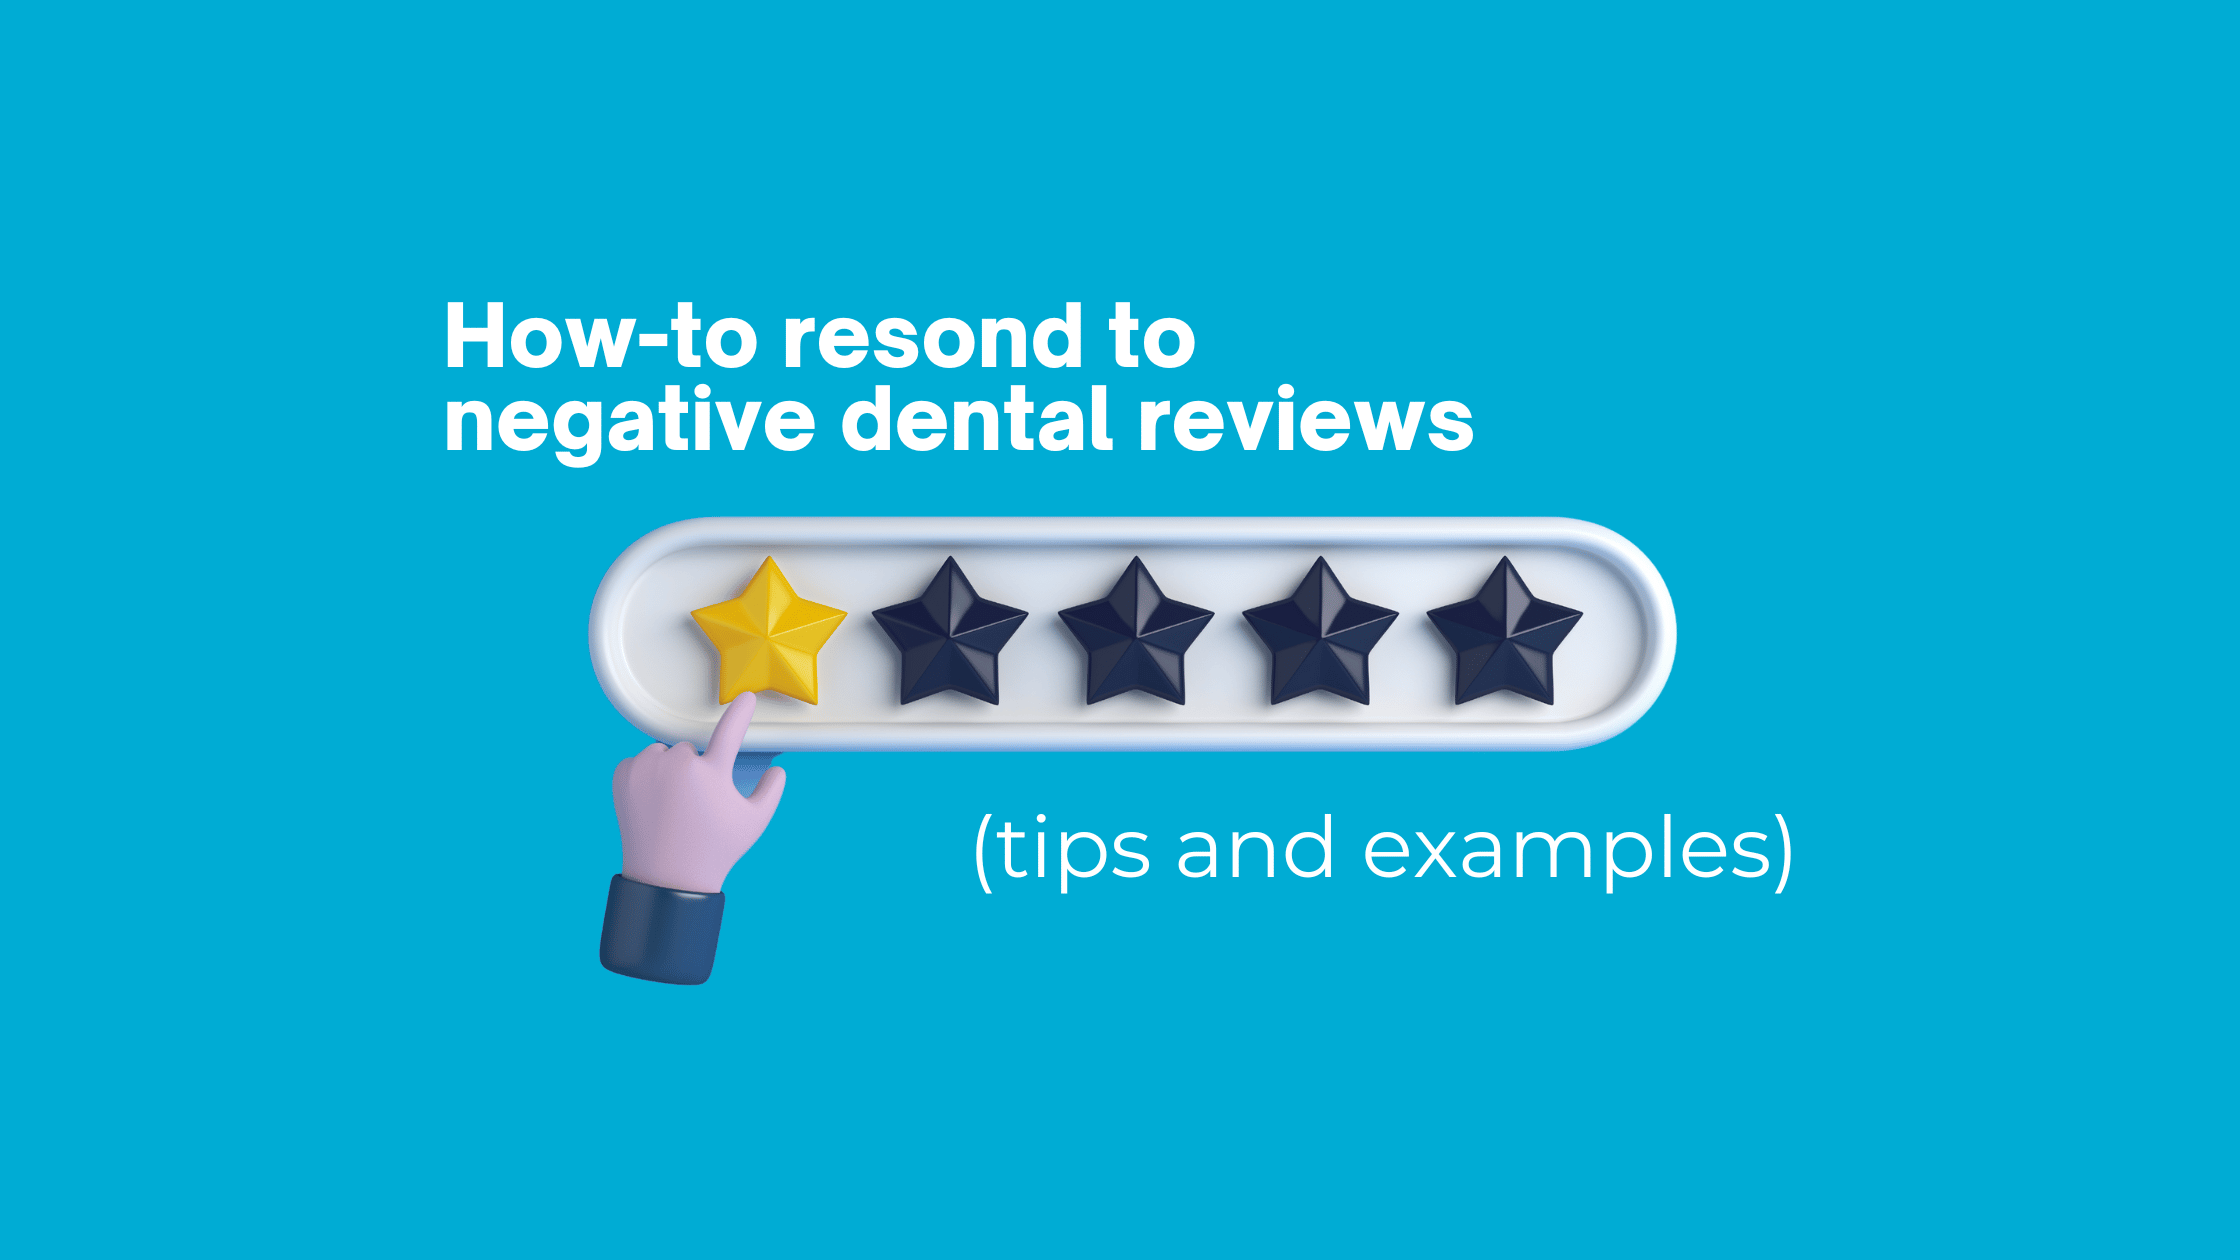 How-to respond to negative dental reviews (tips and examples)